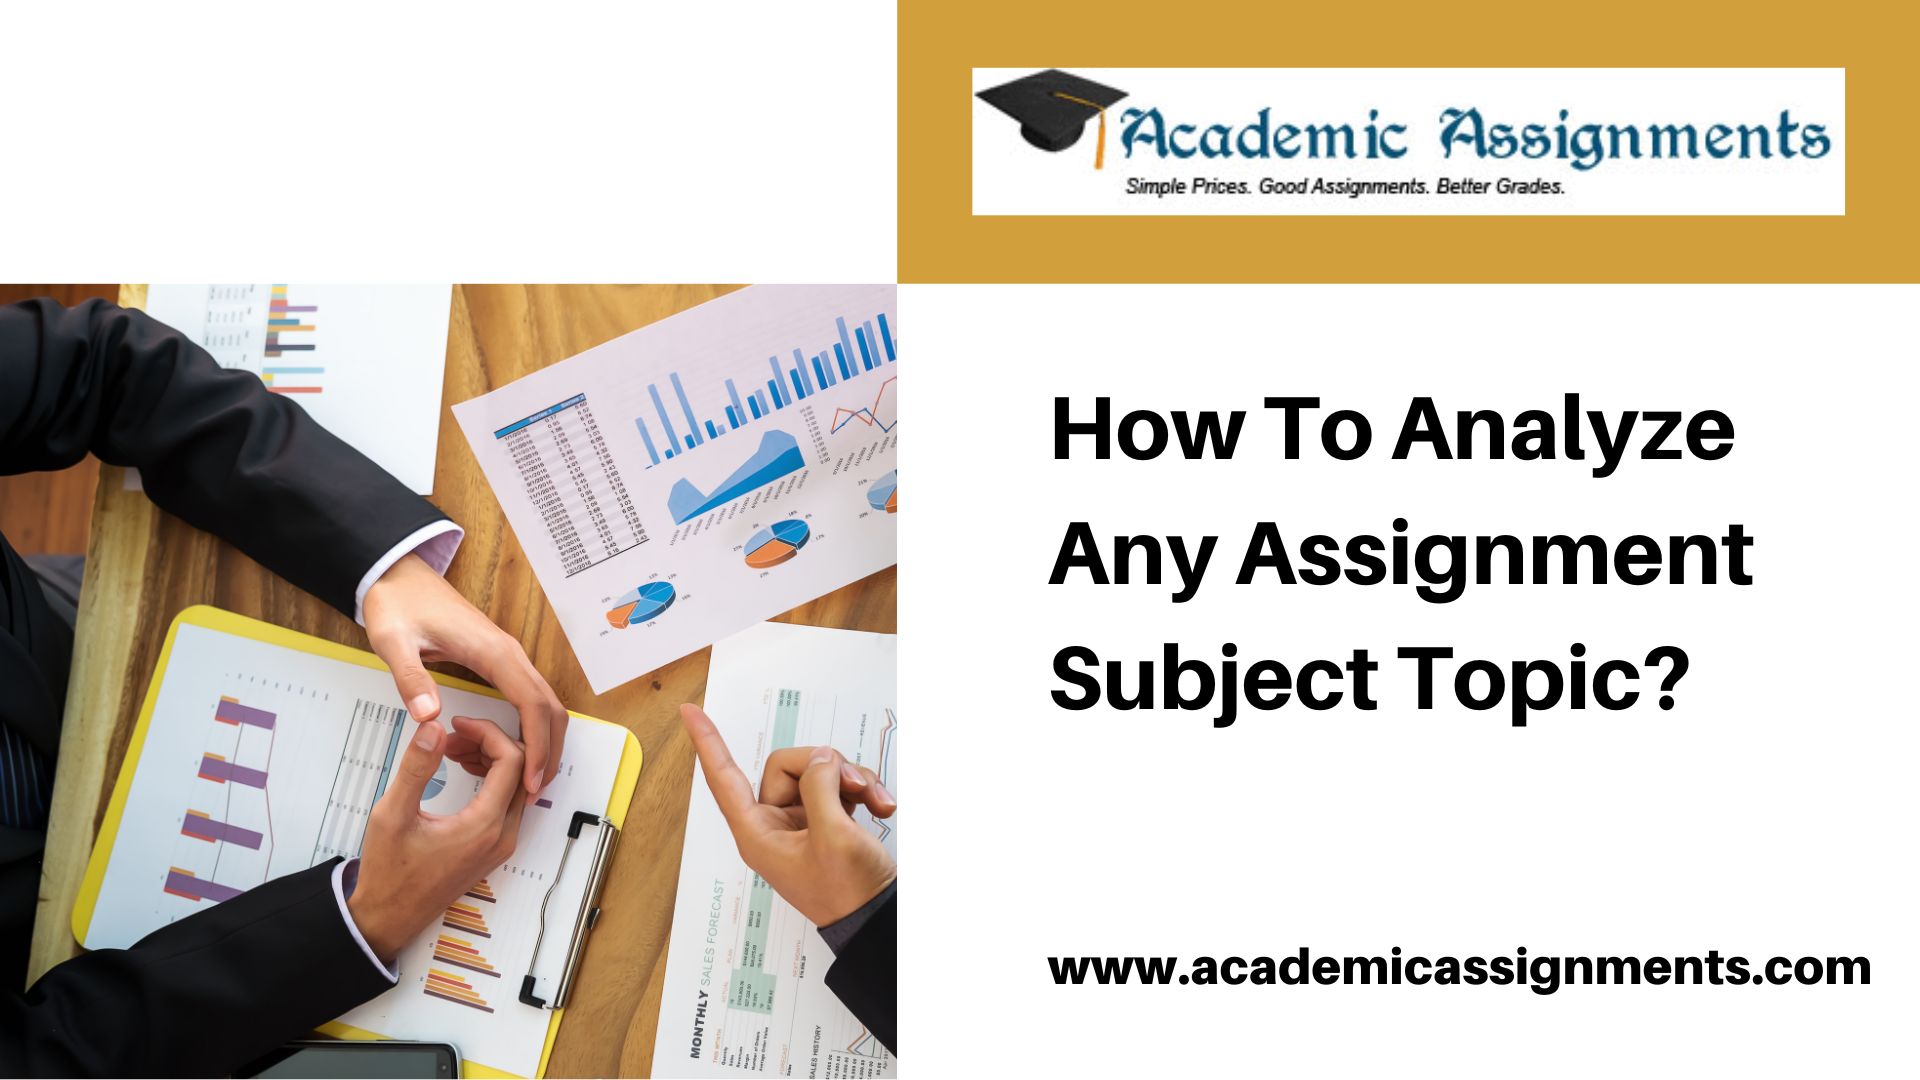 How To Analyze Any Assignment Subject Topic